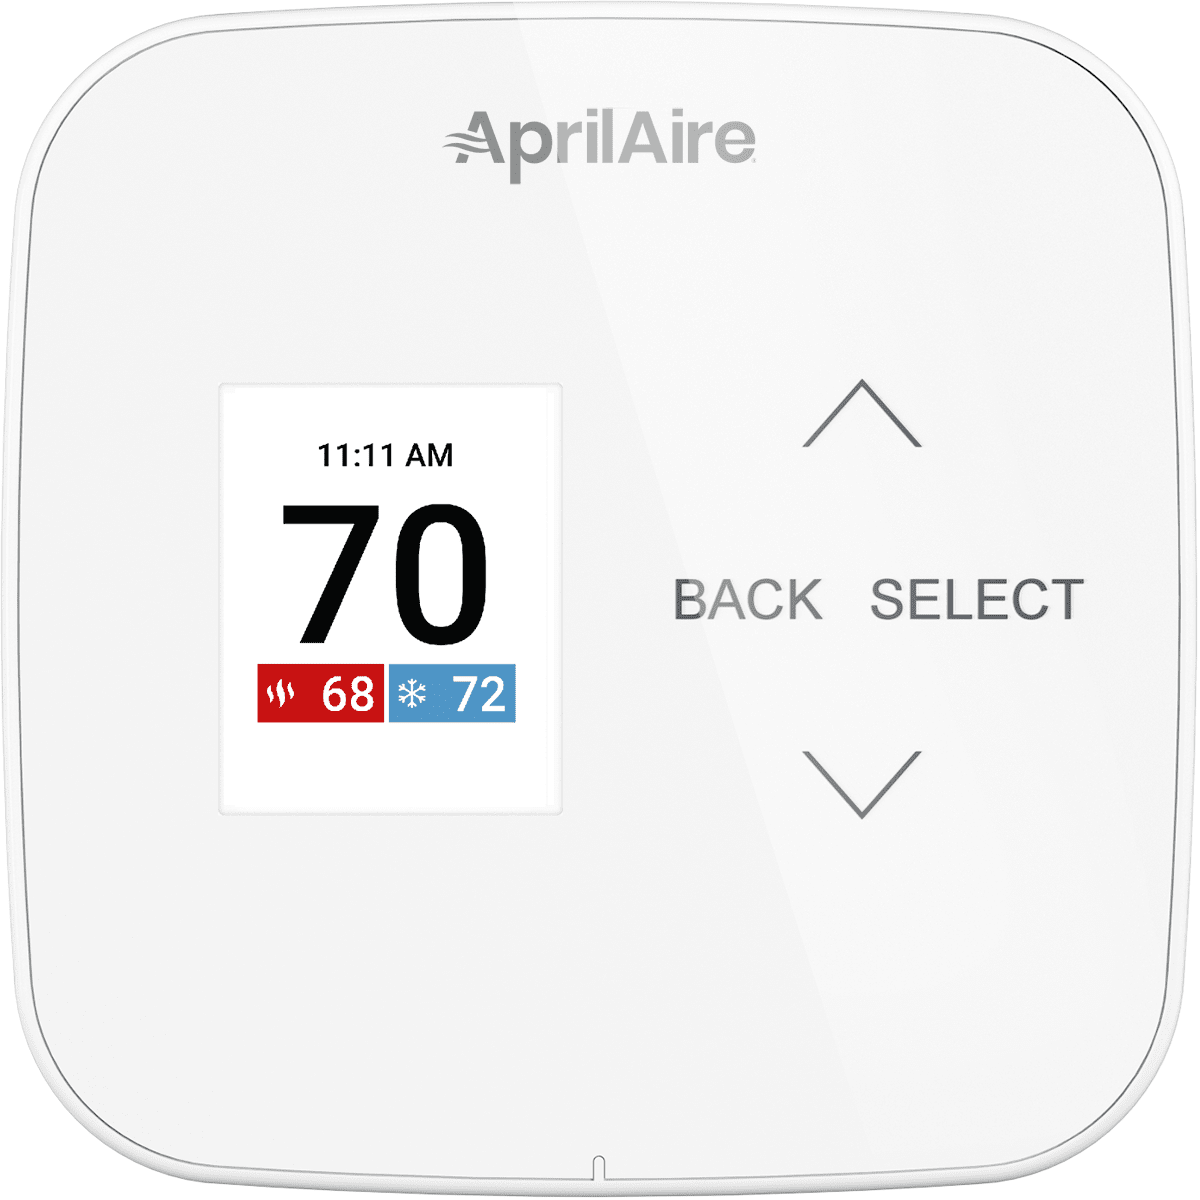 Aprilaire S84NSU Programmable Single-Stage Universal Thermostat